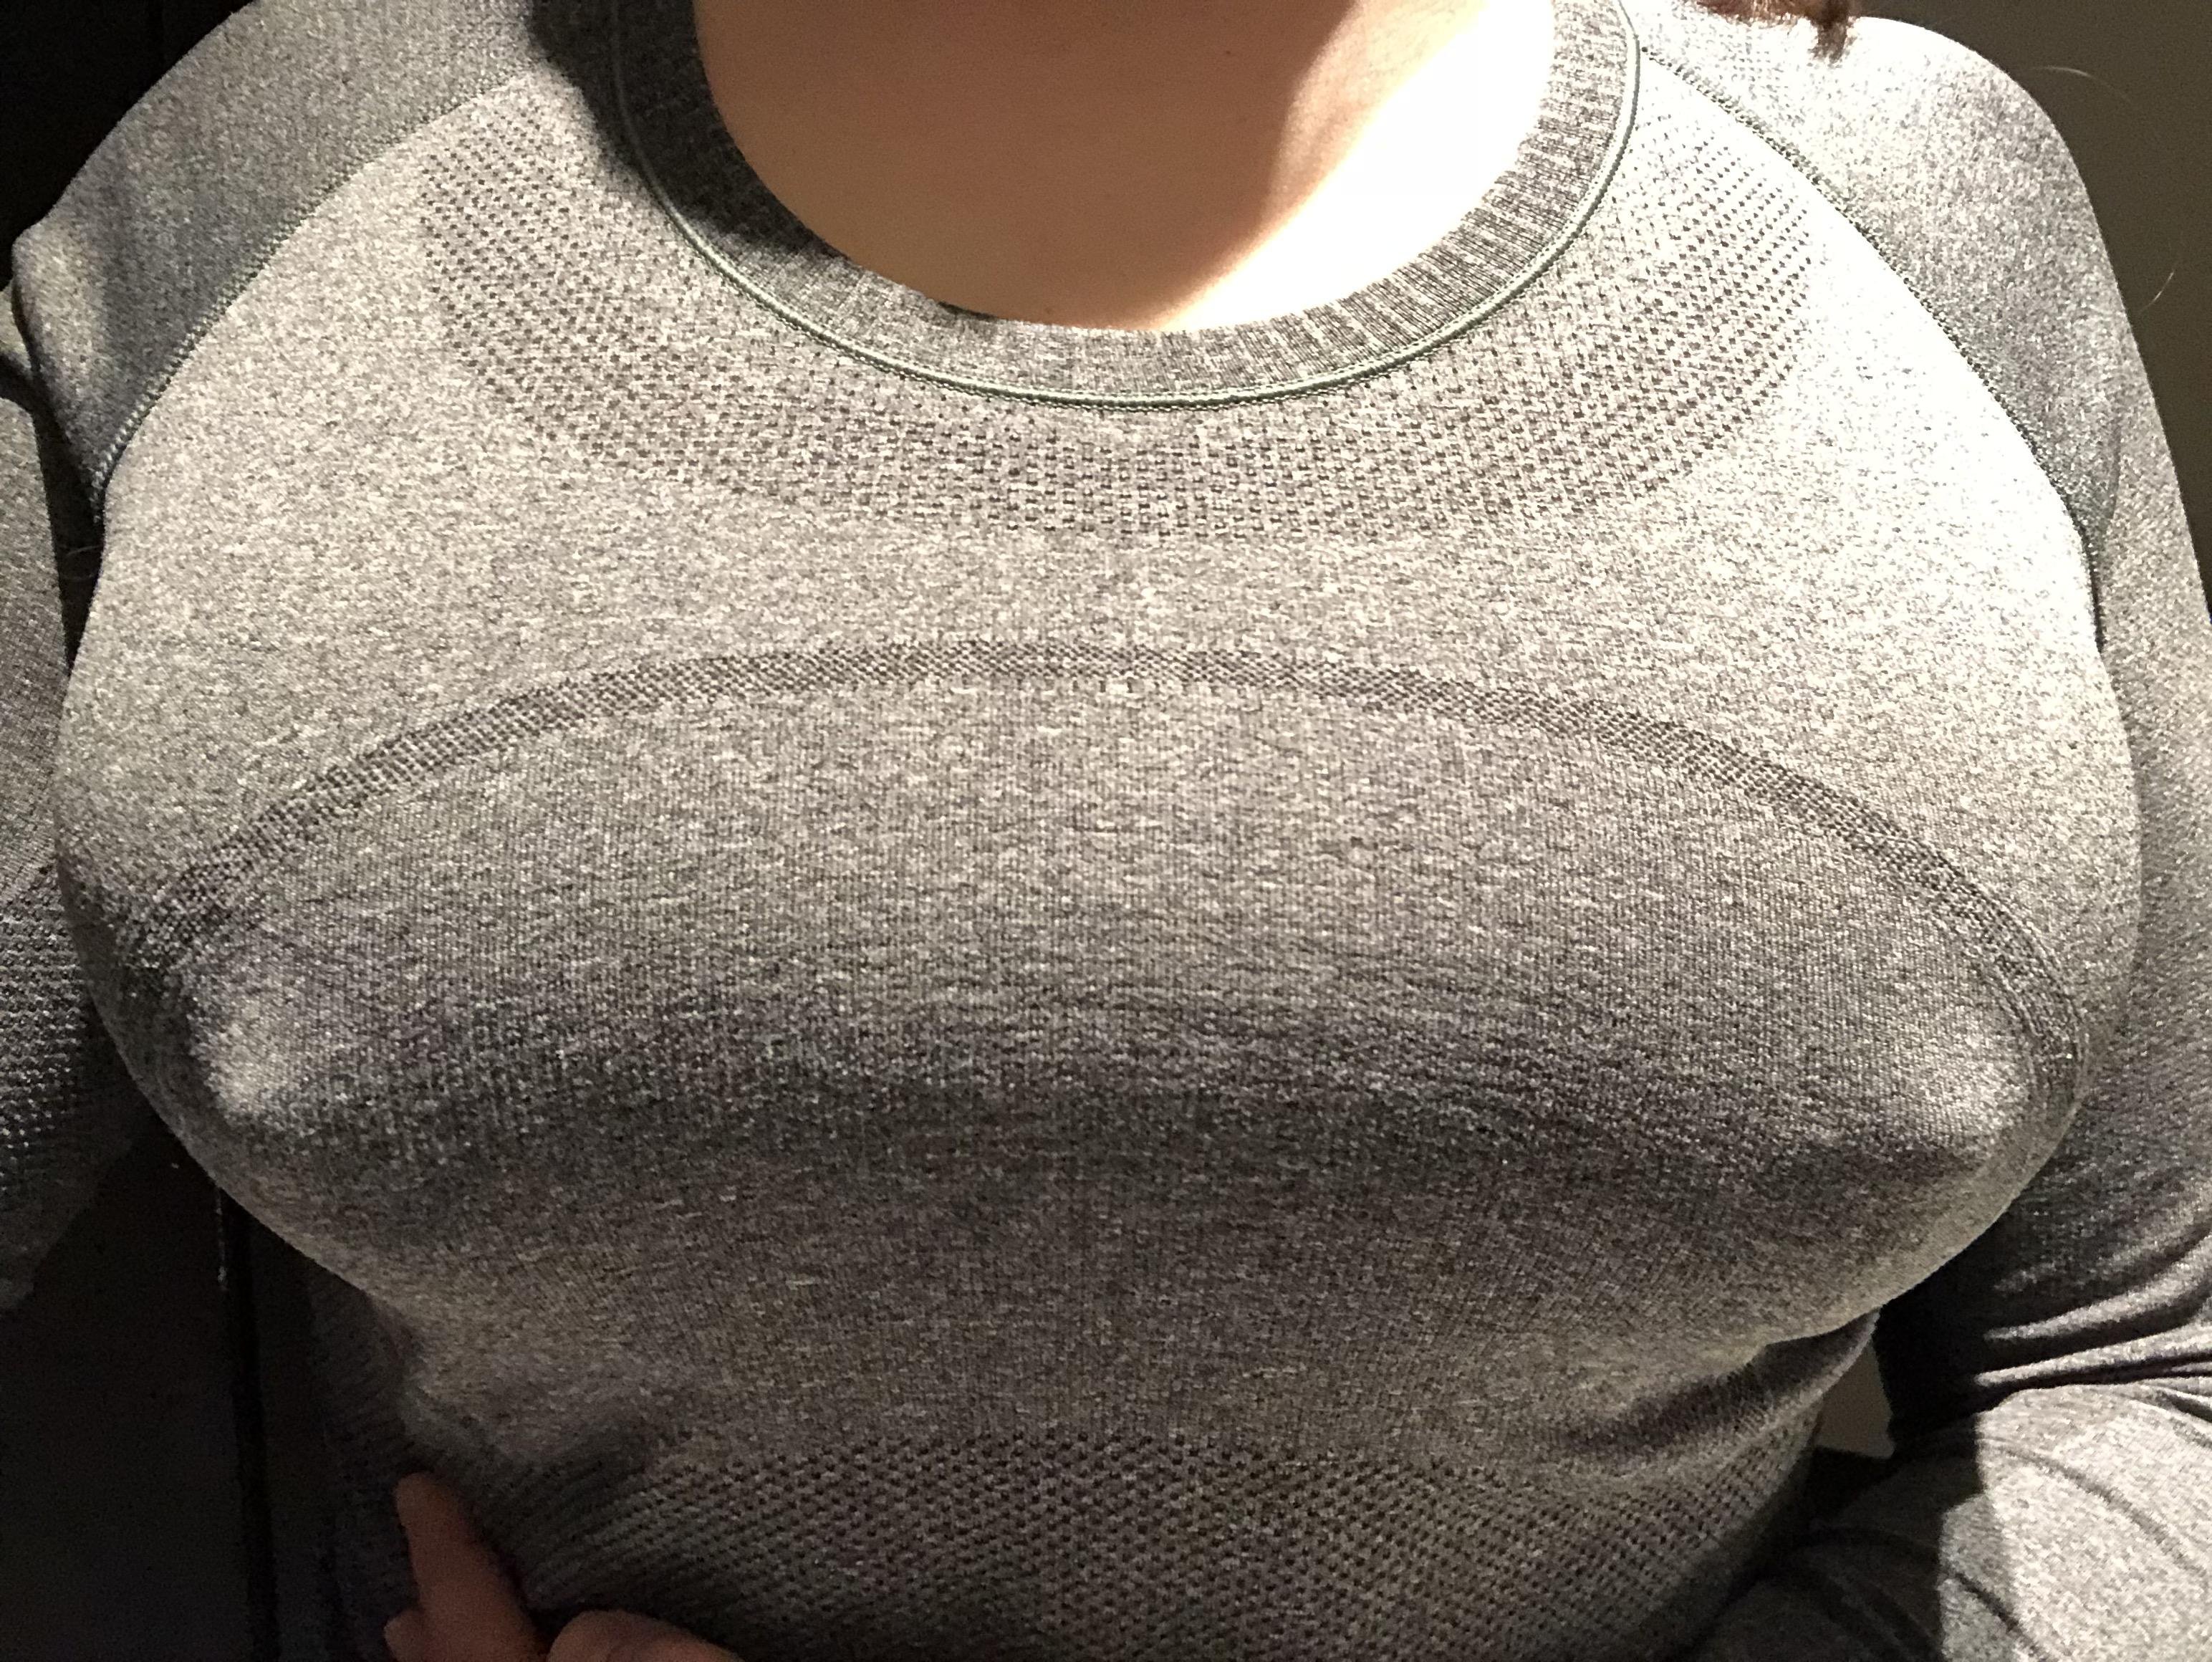 This is how hard/big my teats get before they’ve even been suctioned. This is without a bra. Just the shirt covering them.